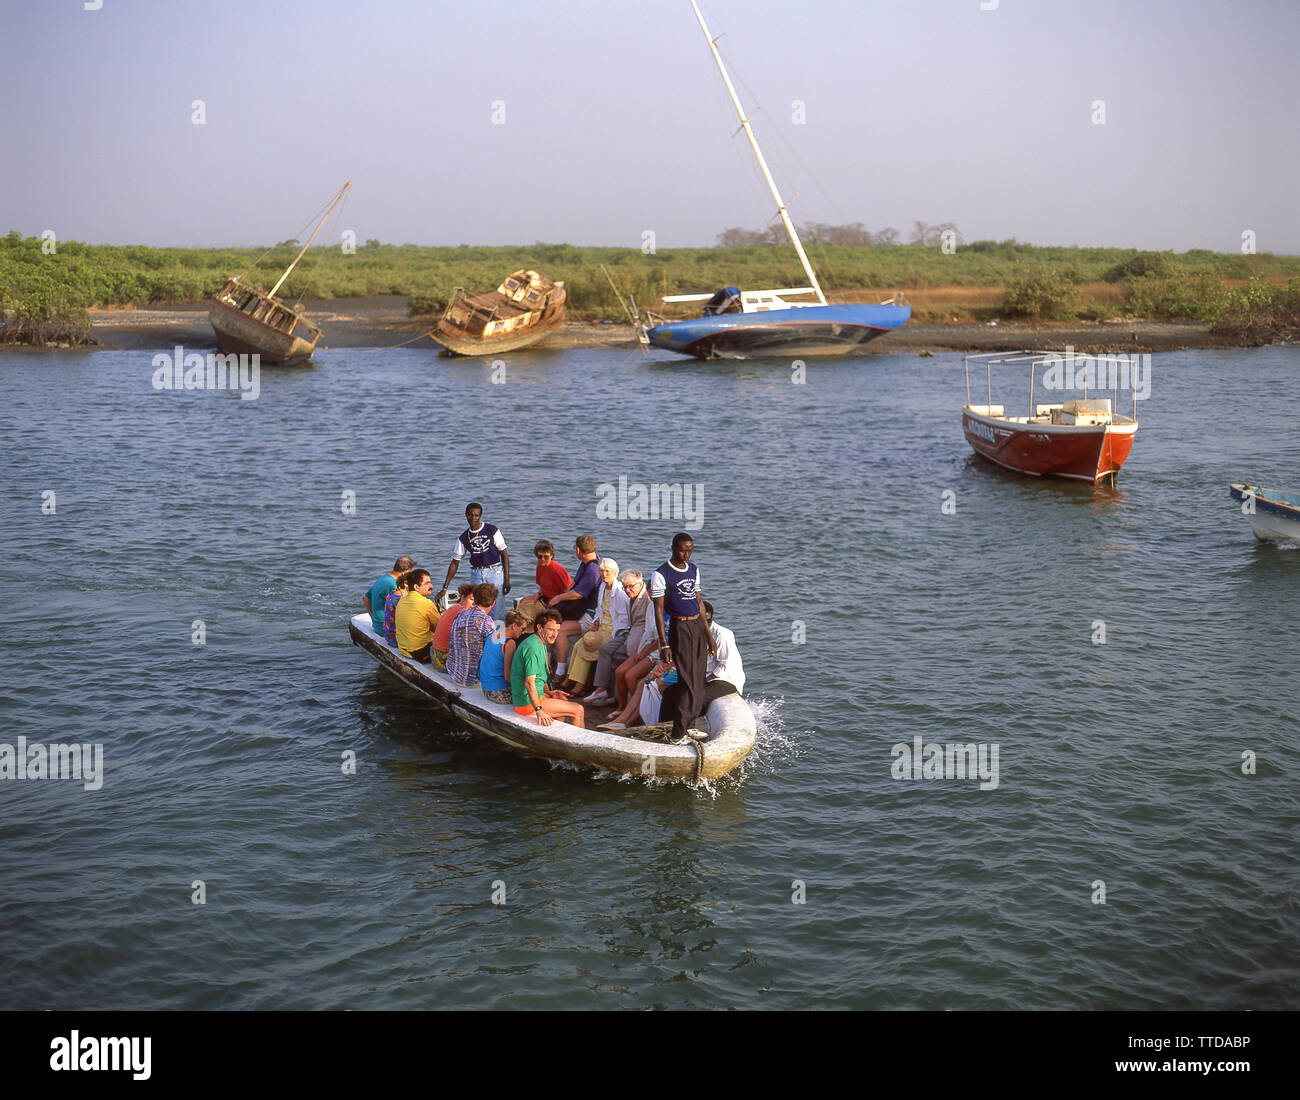 'Roots' sightseeing excursion on River Gambia, near Juffure, North Bank, Republic of The Gambia Stock Photo